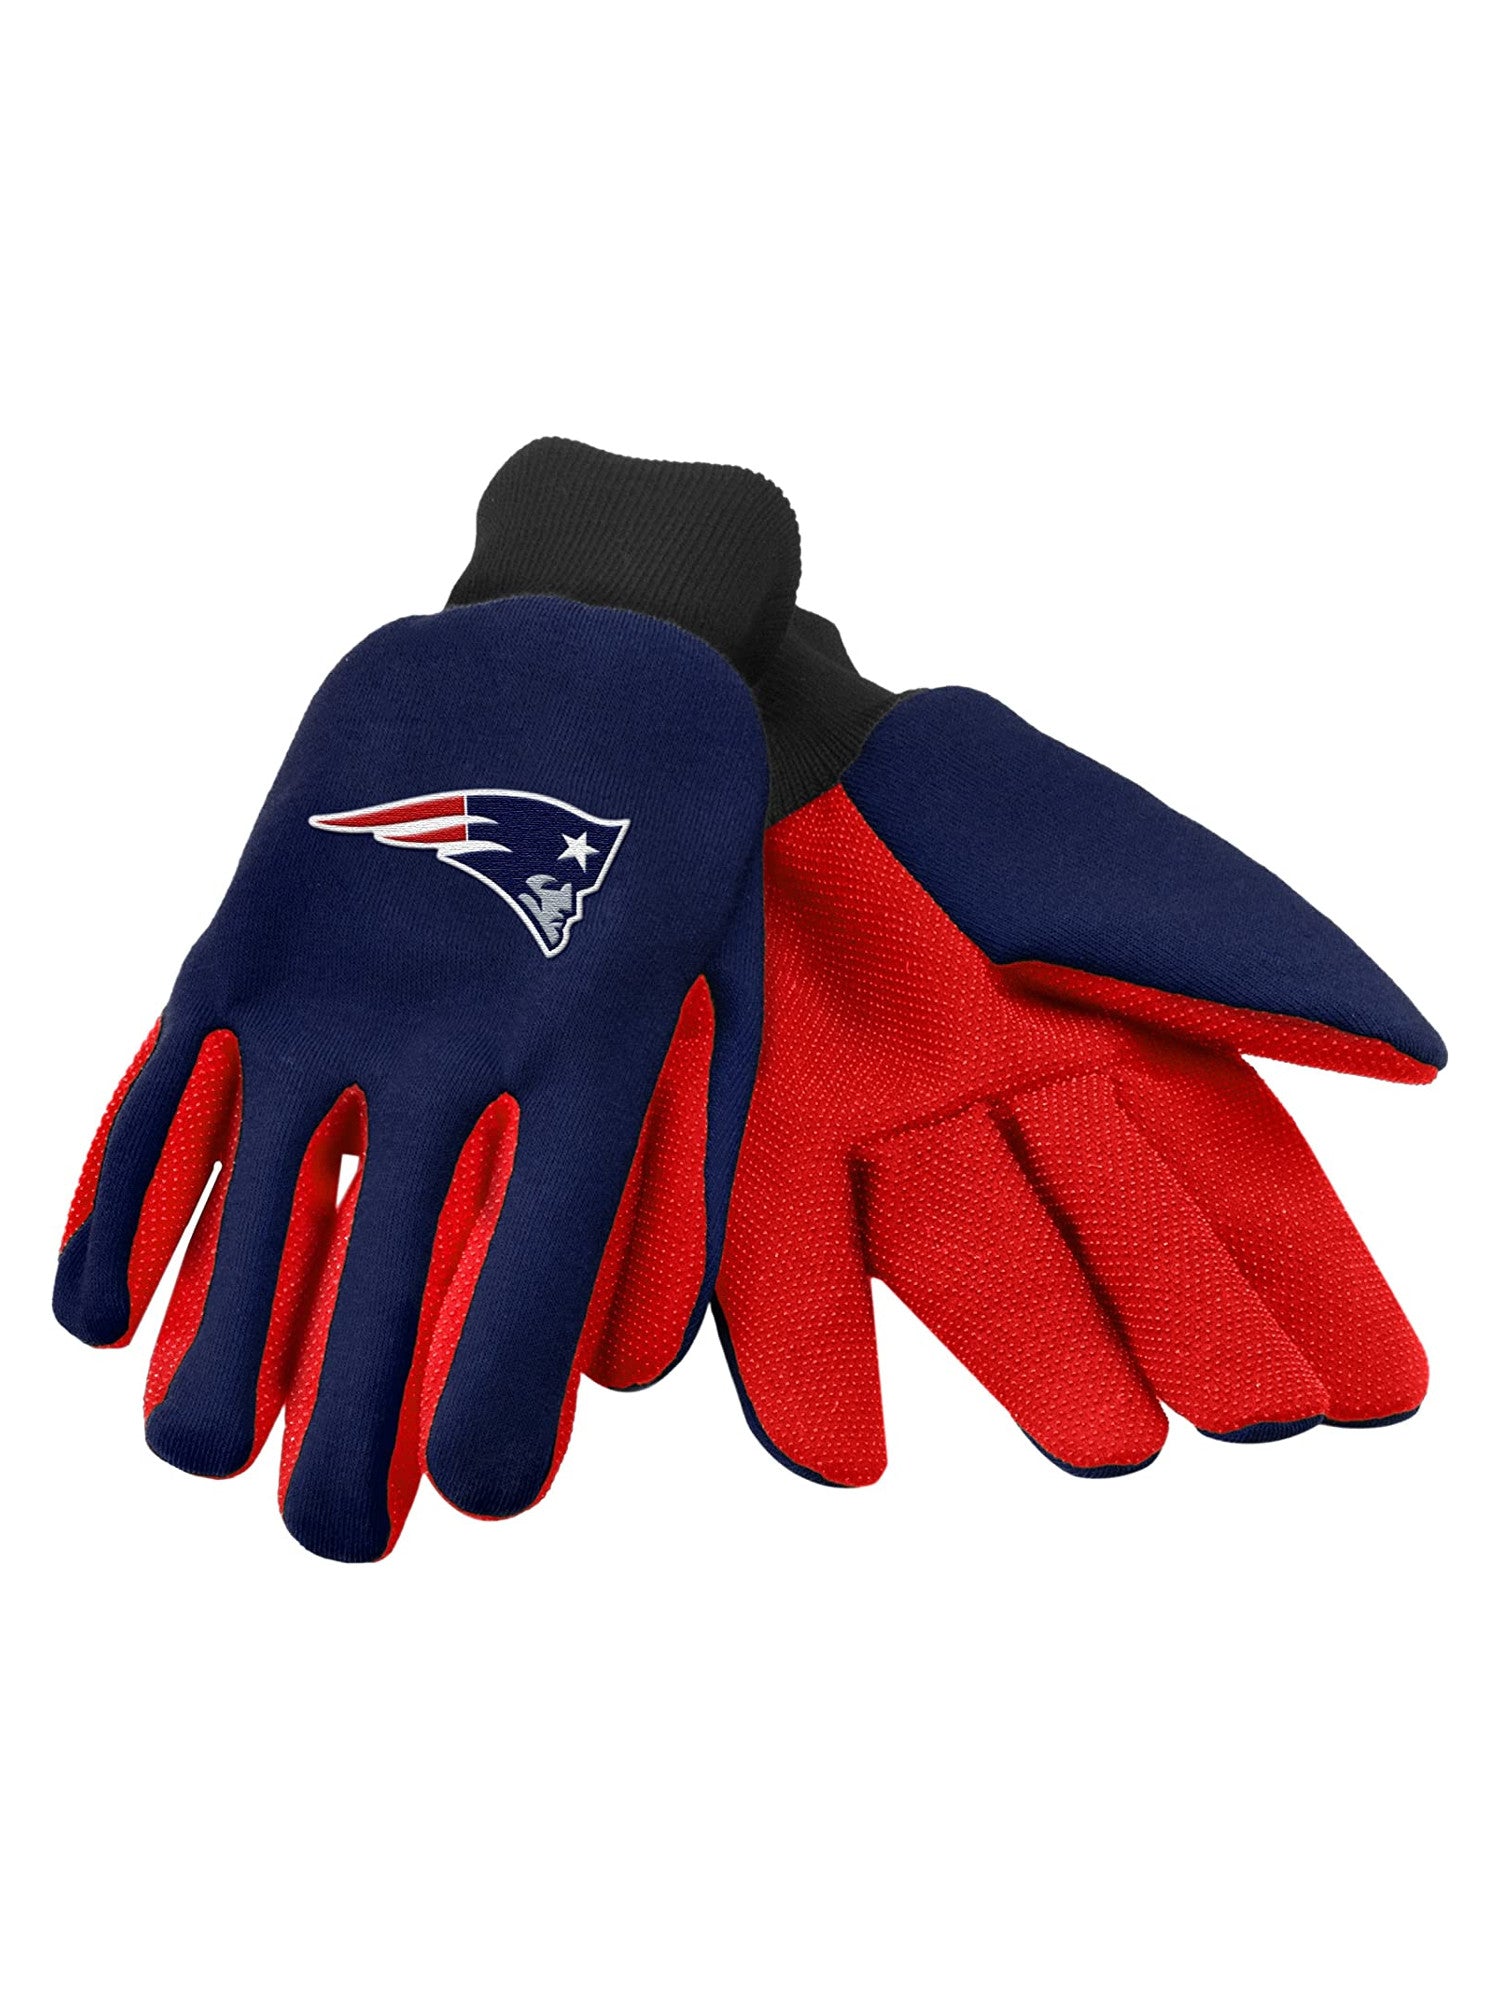 forever-collectibles-nfl-patriots-utility-gloves